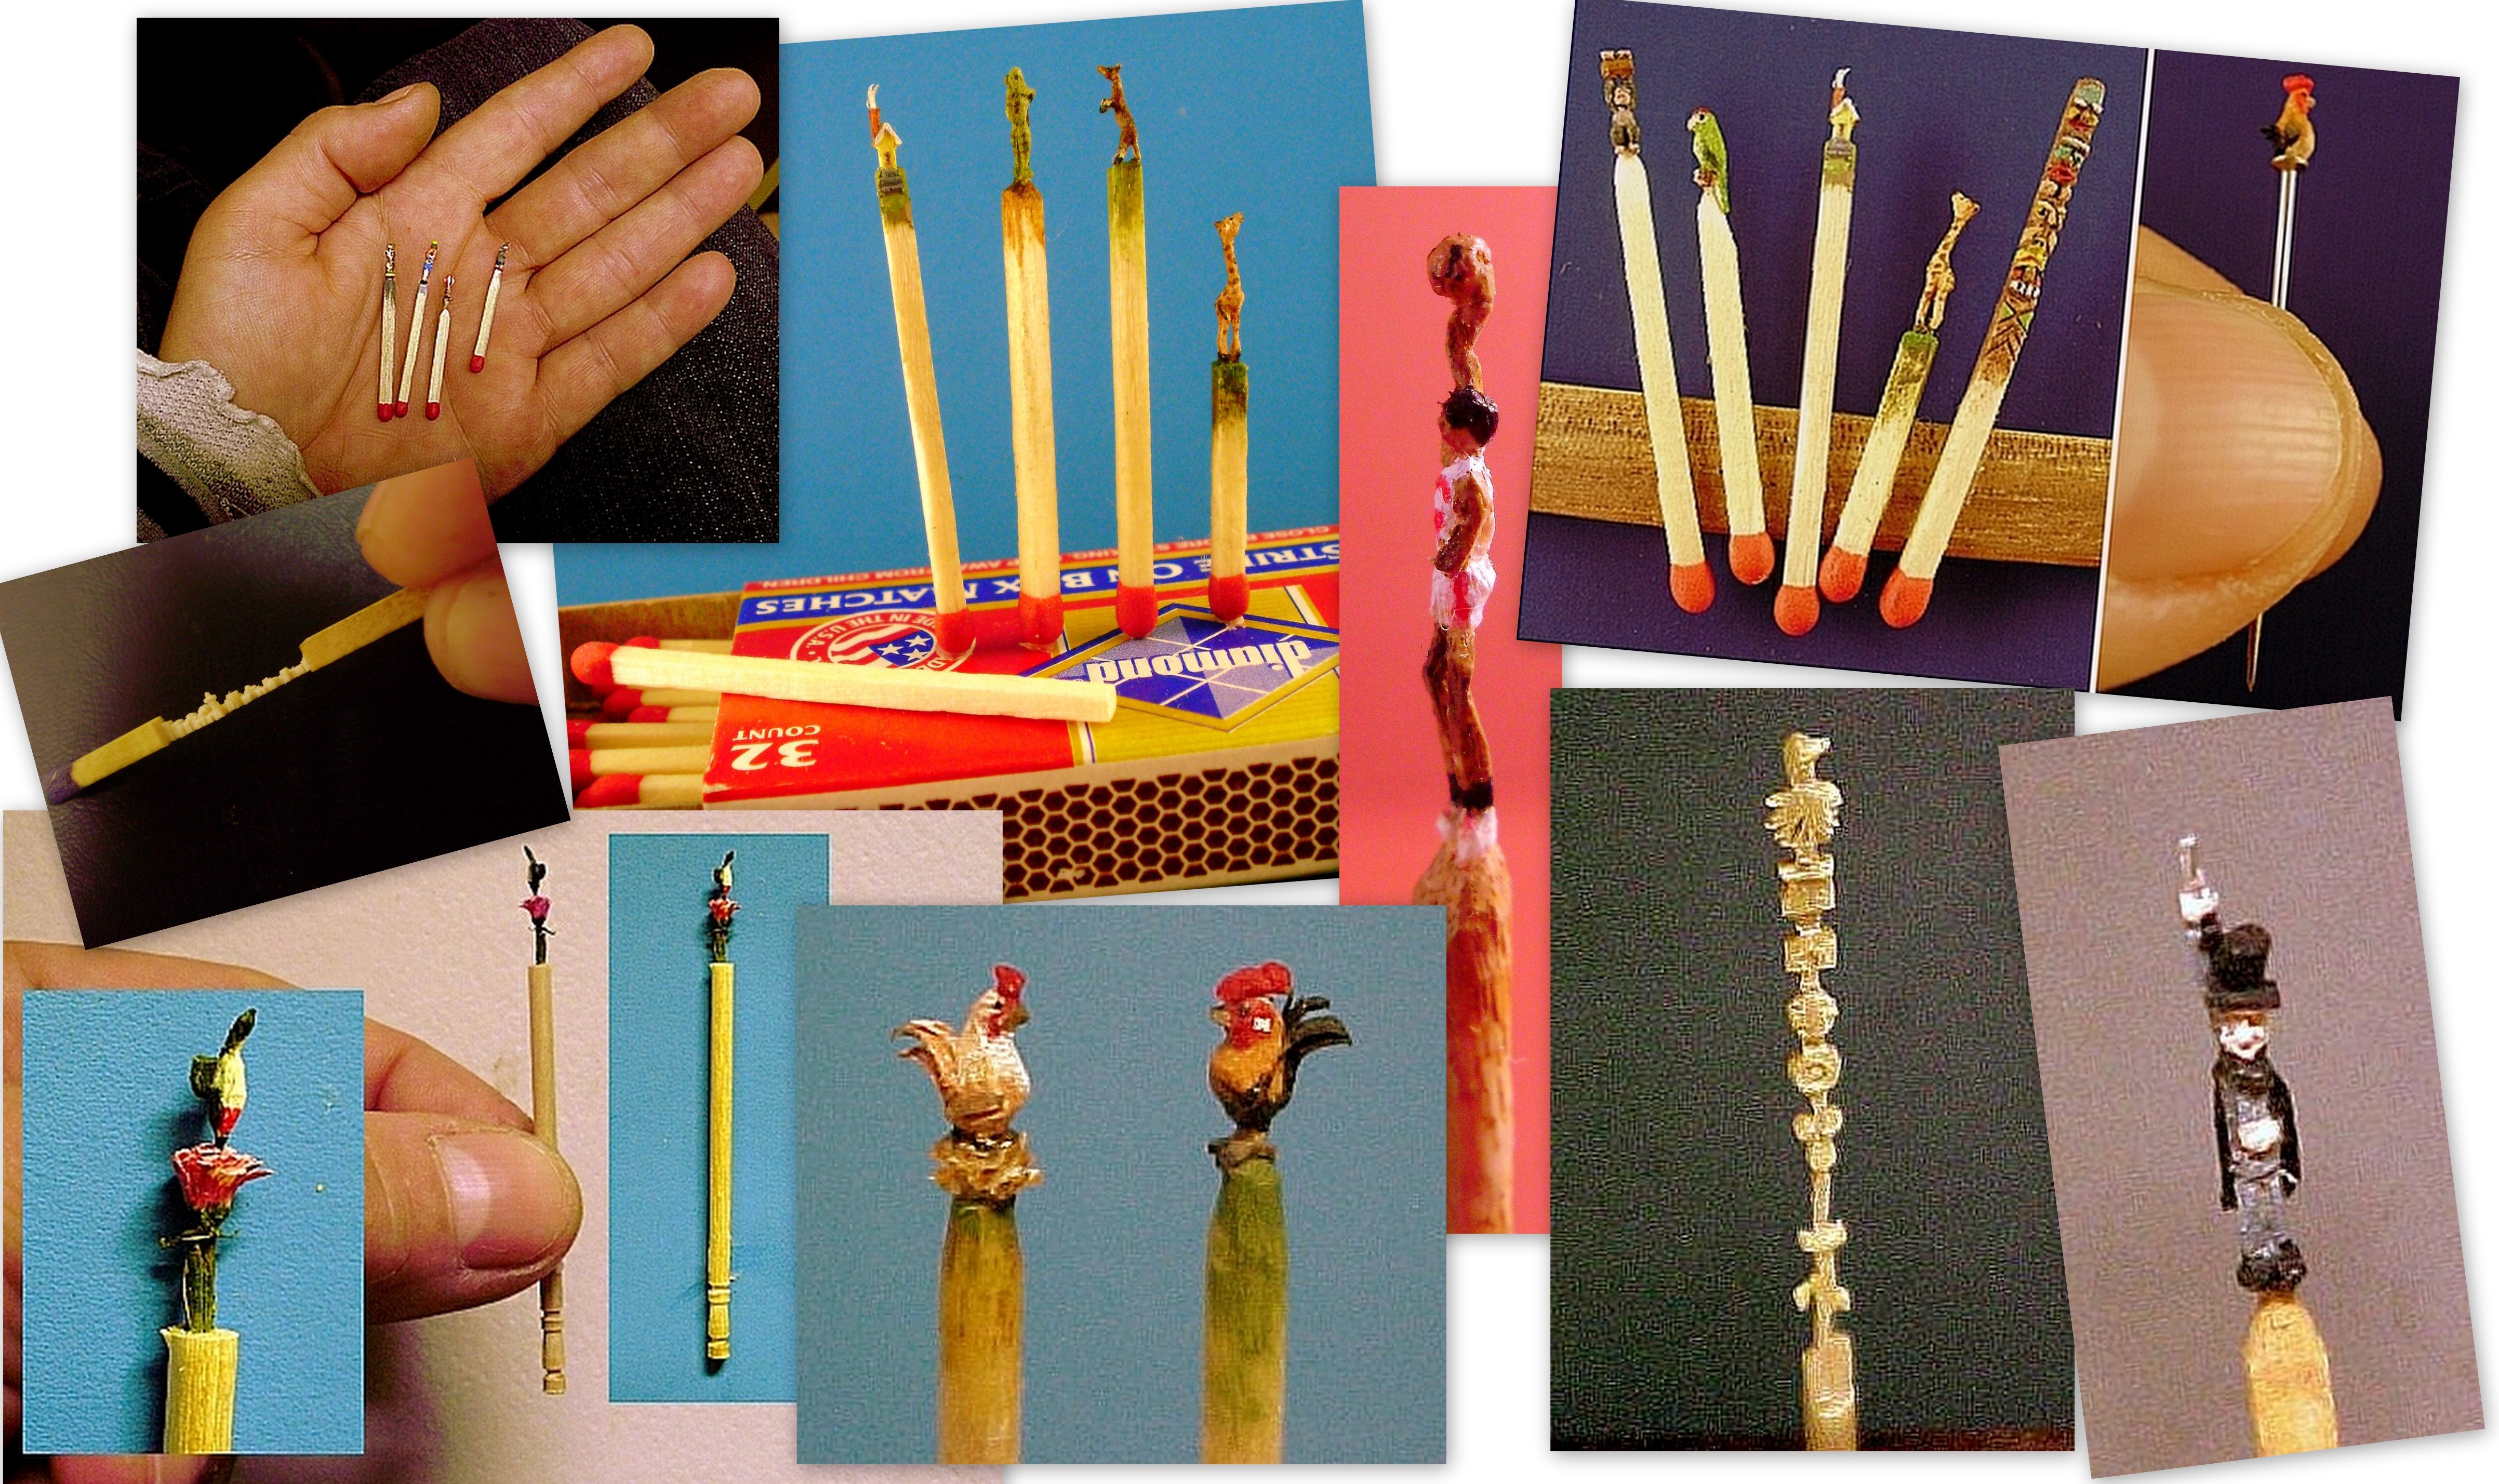 Very intricate hand carved hand painted toothpicks and matchsticks